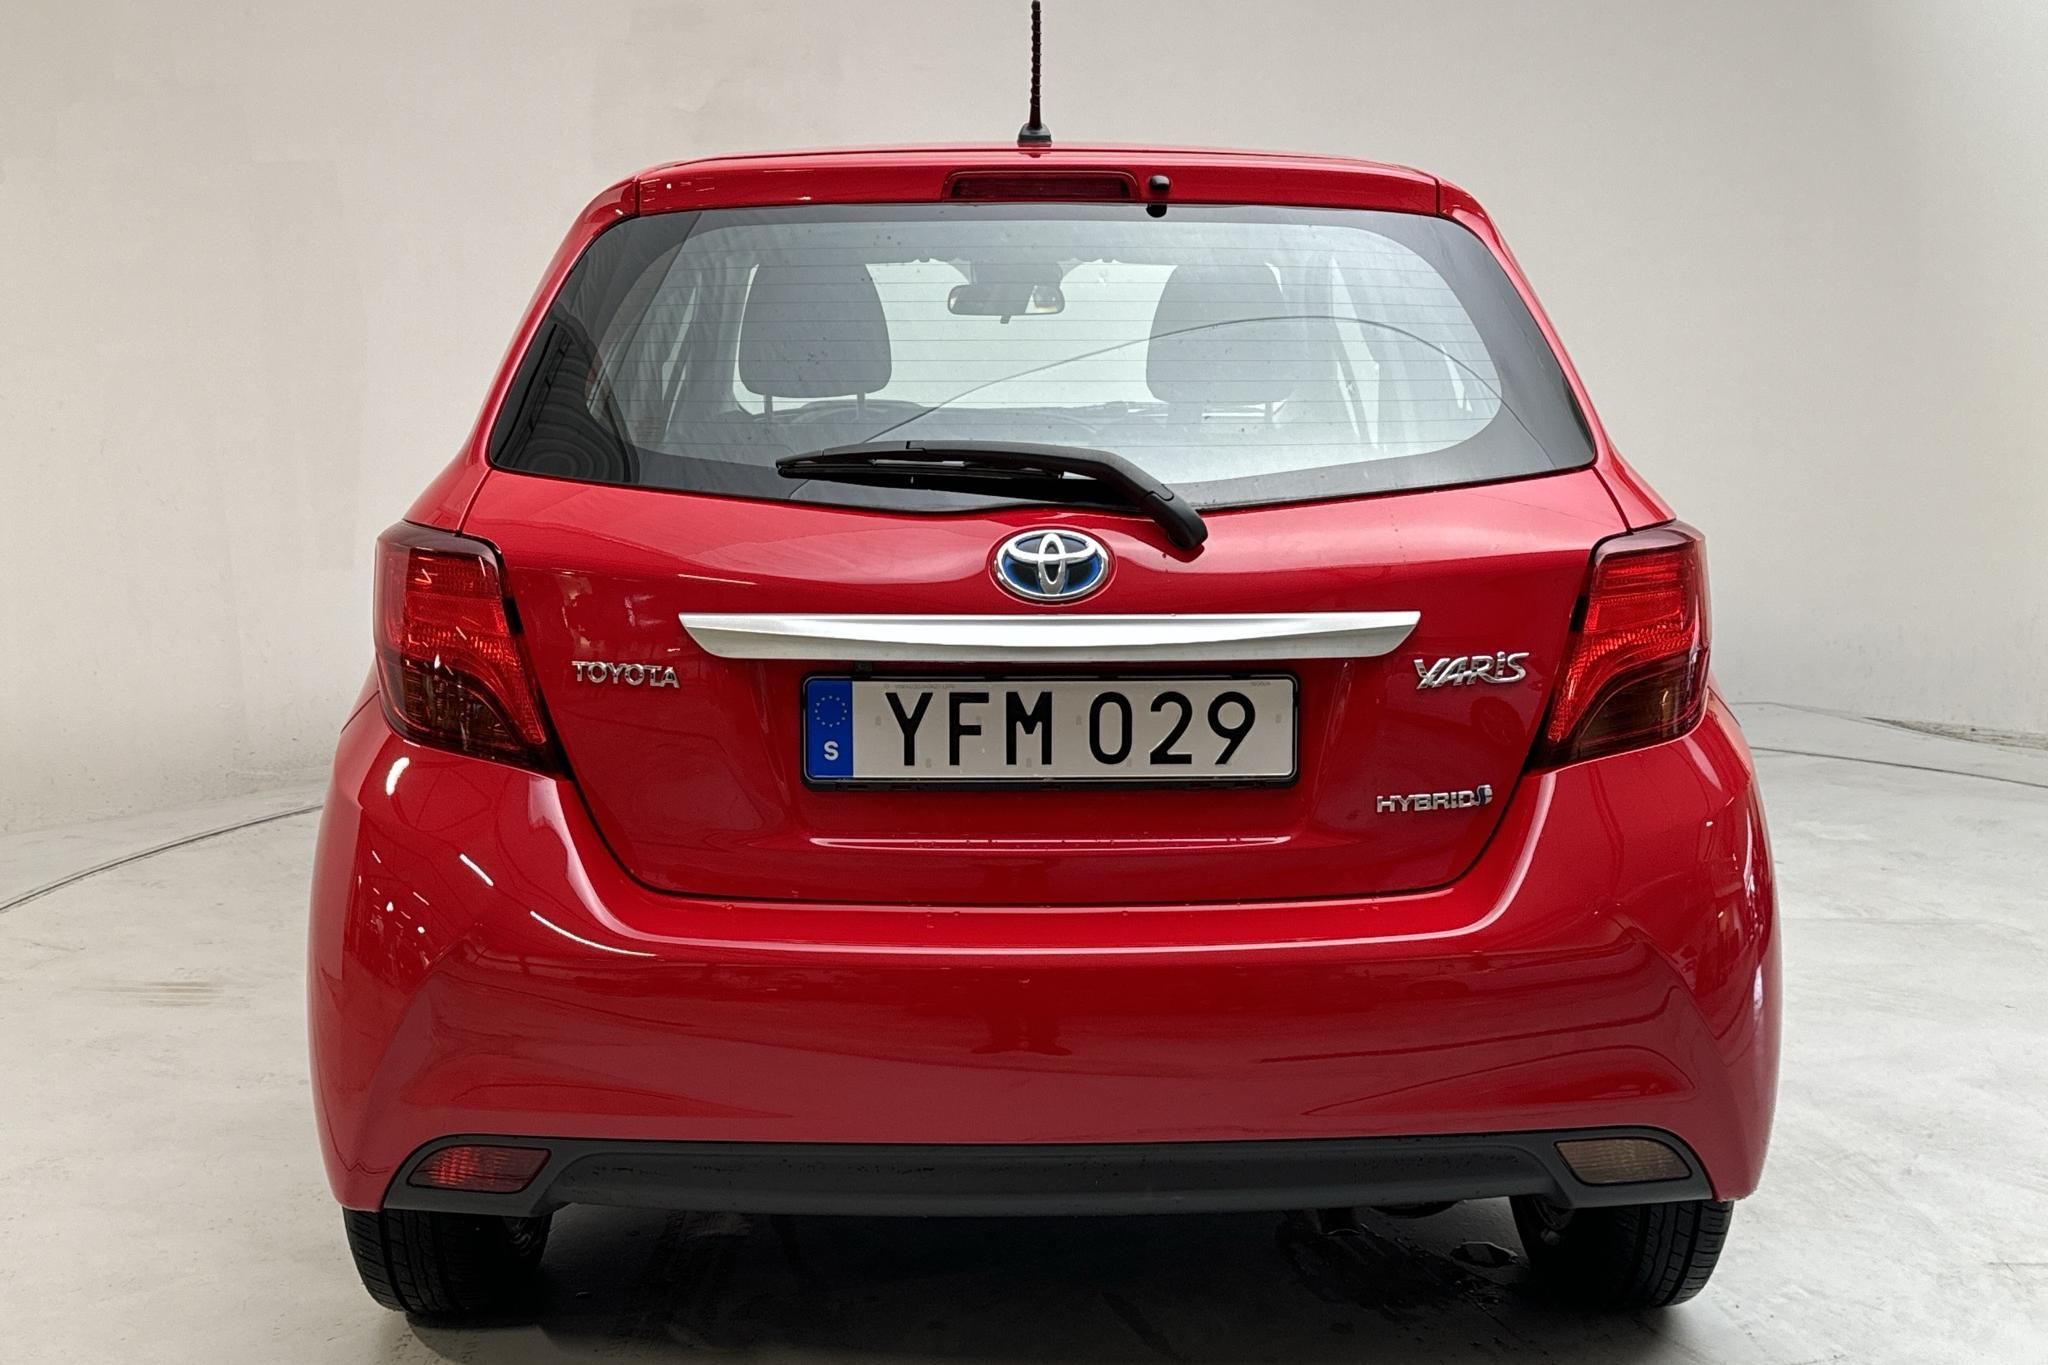 Toyota Yaris 1.5 HSD 5dr (75hk) - 82 110 km - Automatic - red - 2016